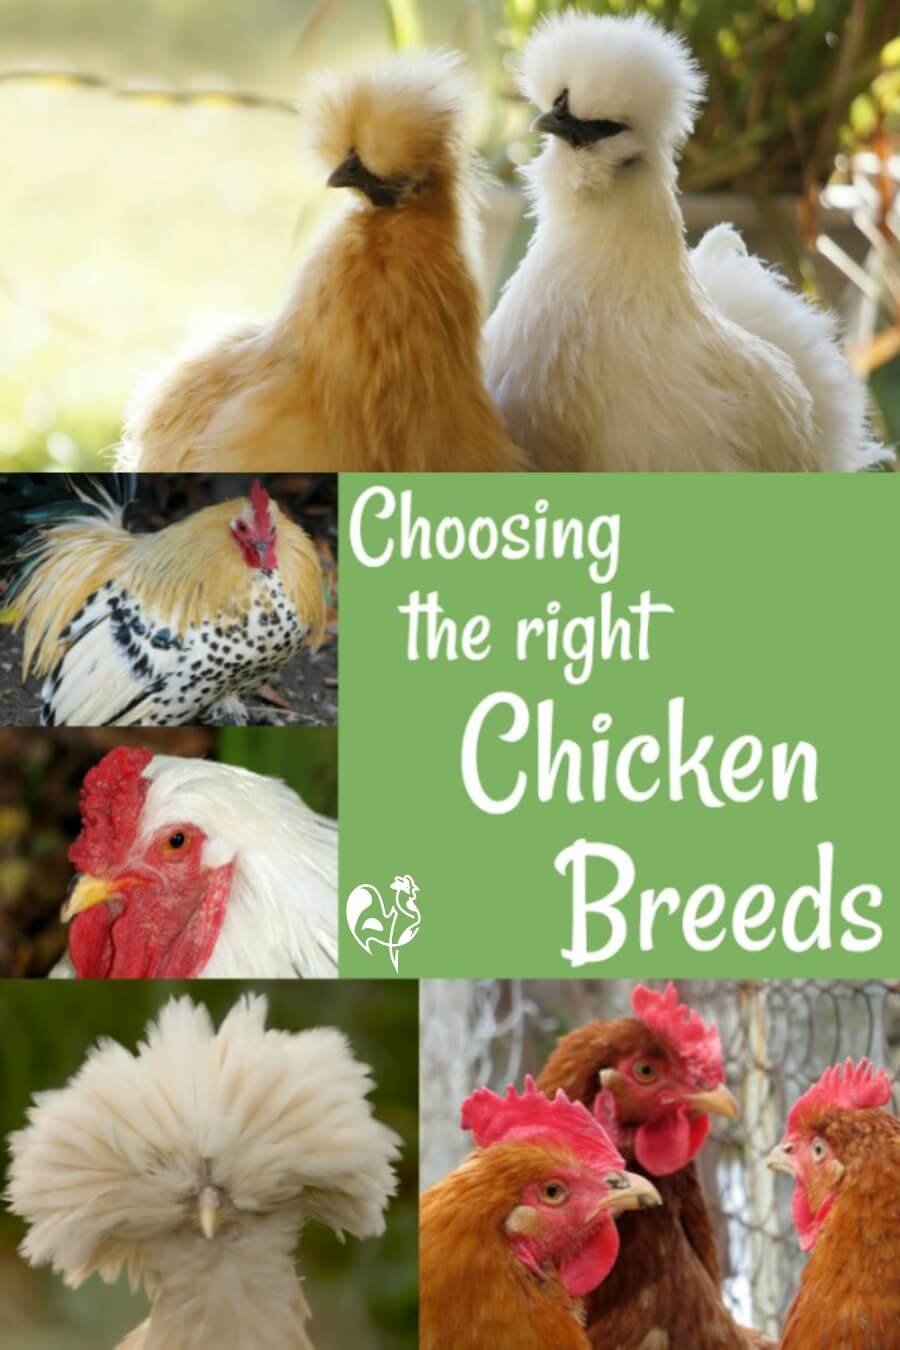 breeds of fowl